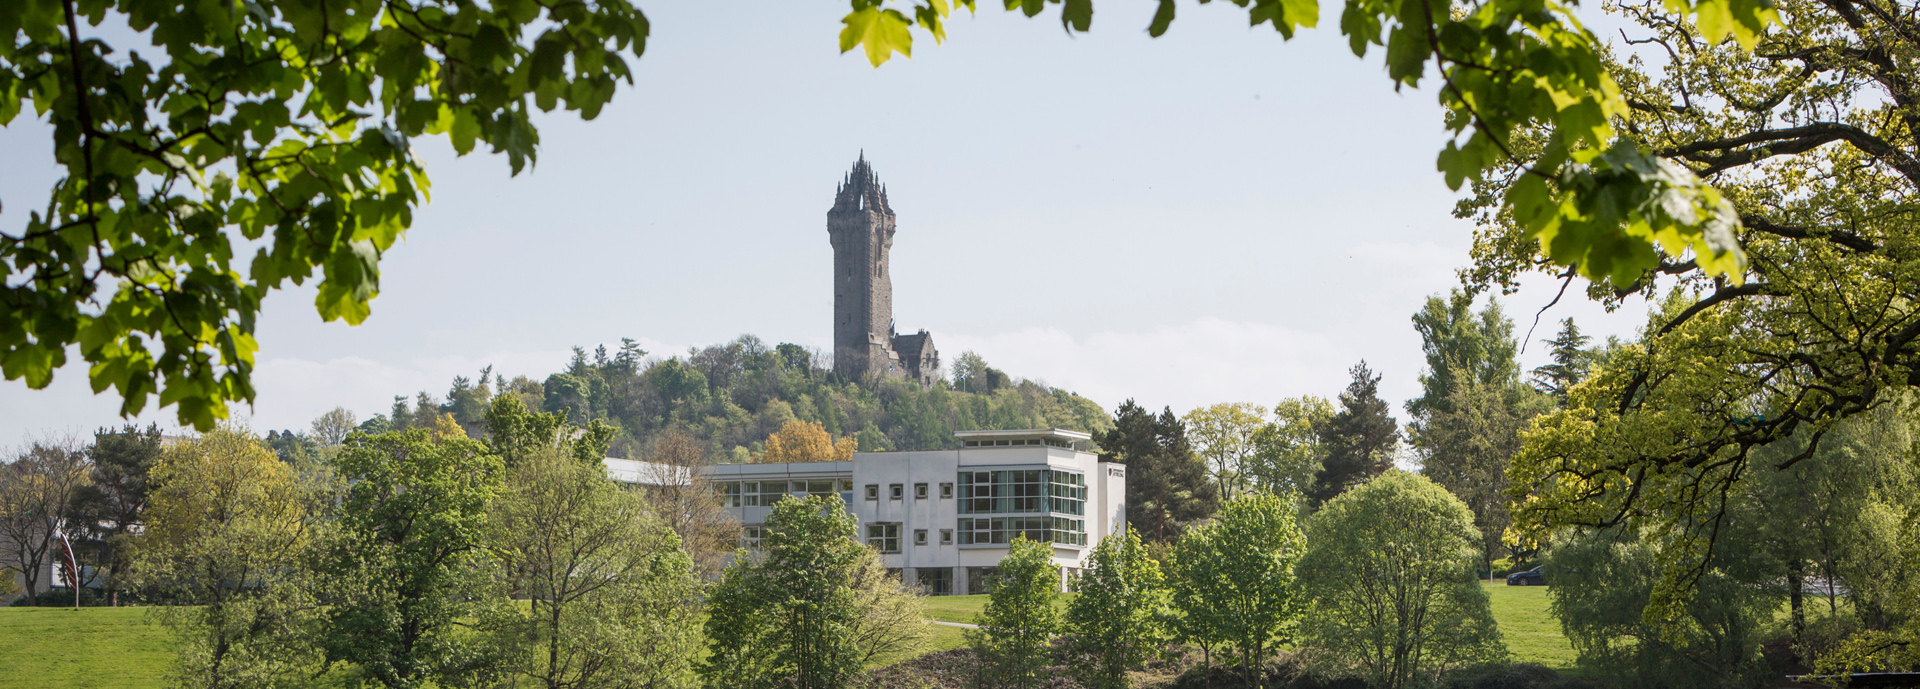 Domestic Abuse Seminar Series at the University of Stirling